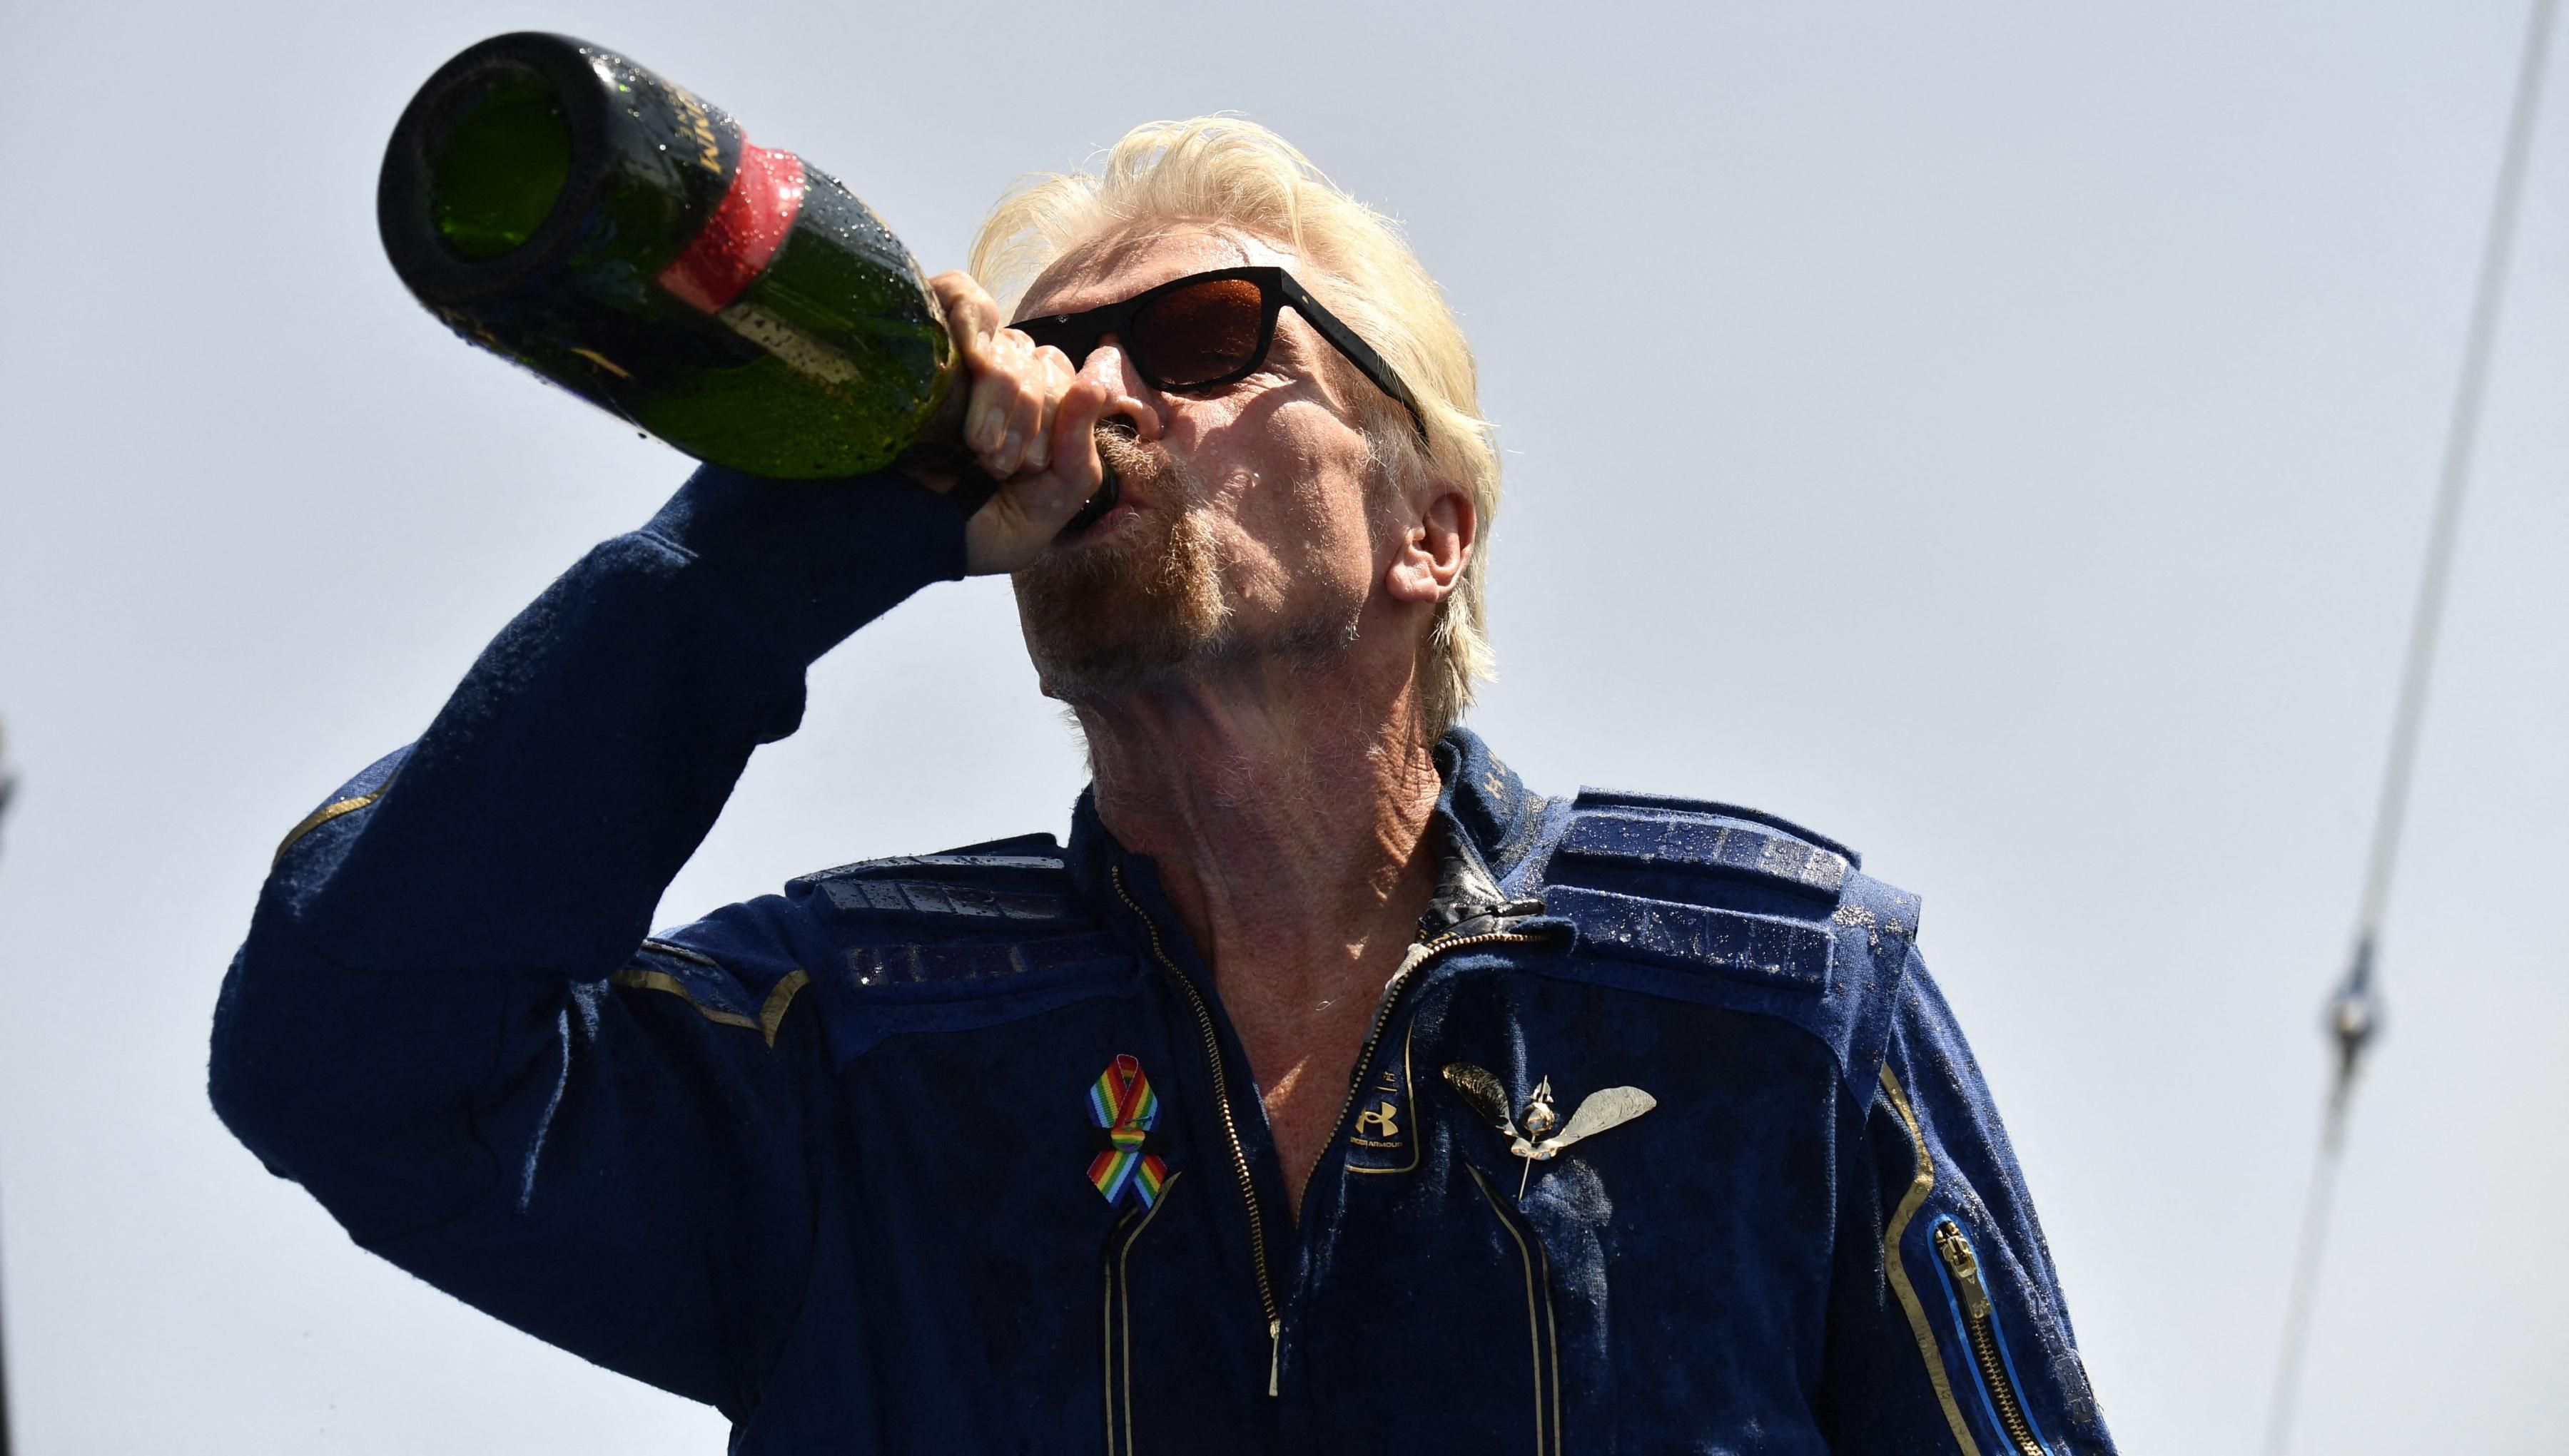 Richard Branson drinking champaign after space launch